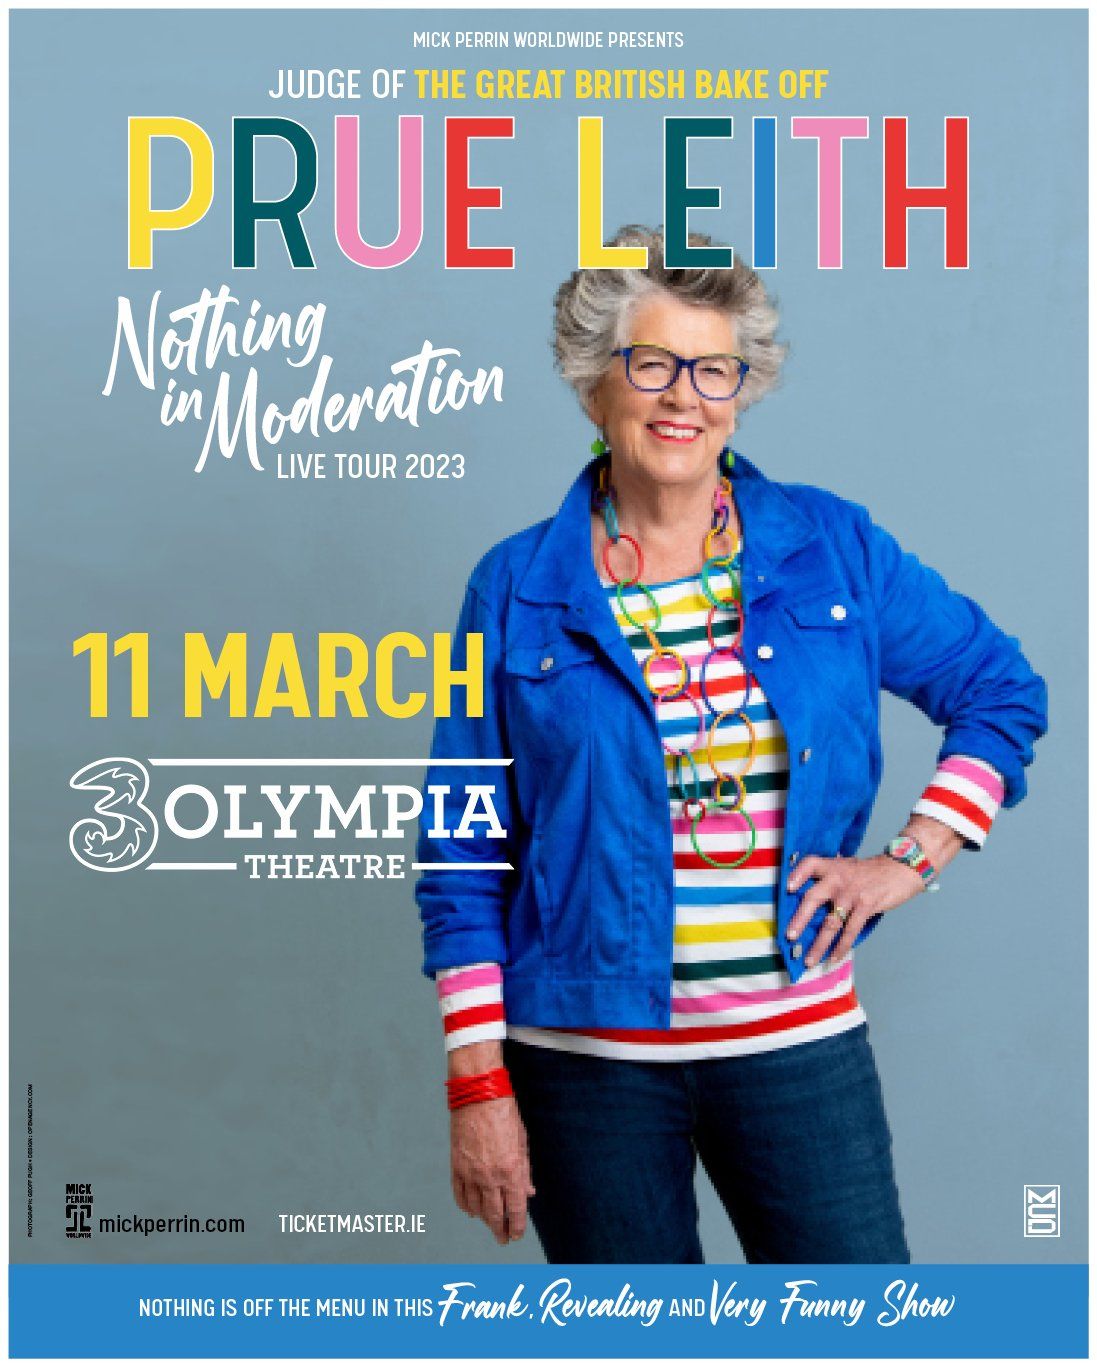 From the Great British Bake-Off  PRUE LEITH’S NEW LIVE SHOW  NOTHING IN MODERATION   COMING TO THE 3OLYMPIA THEATRE DUBLIN